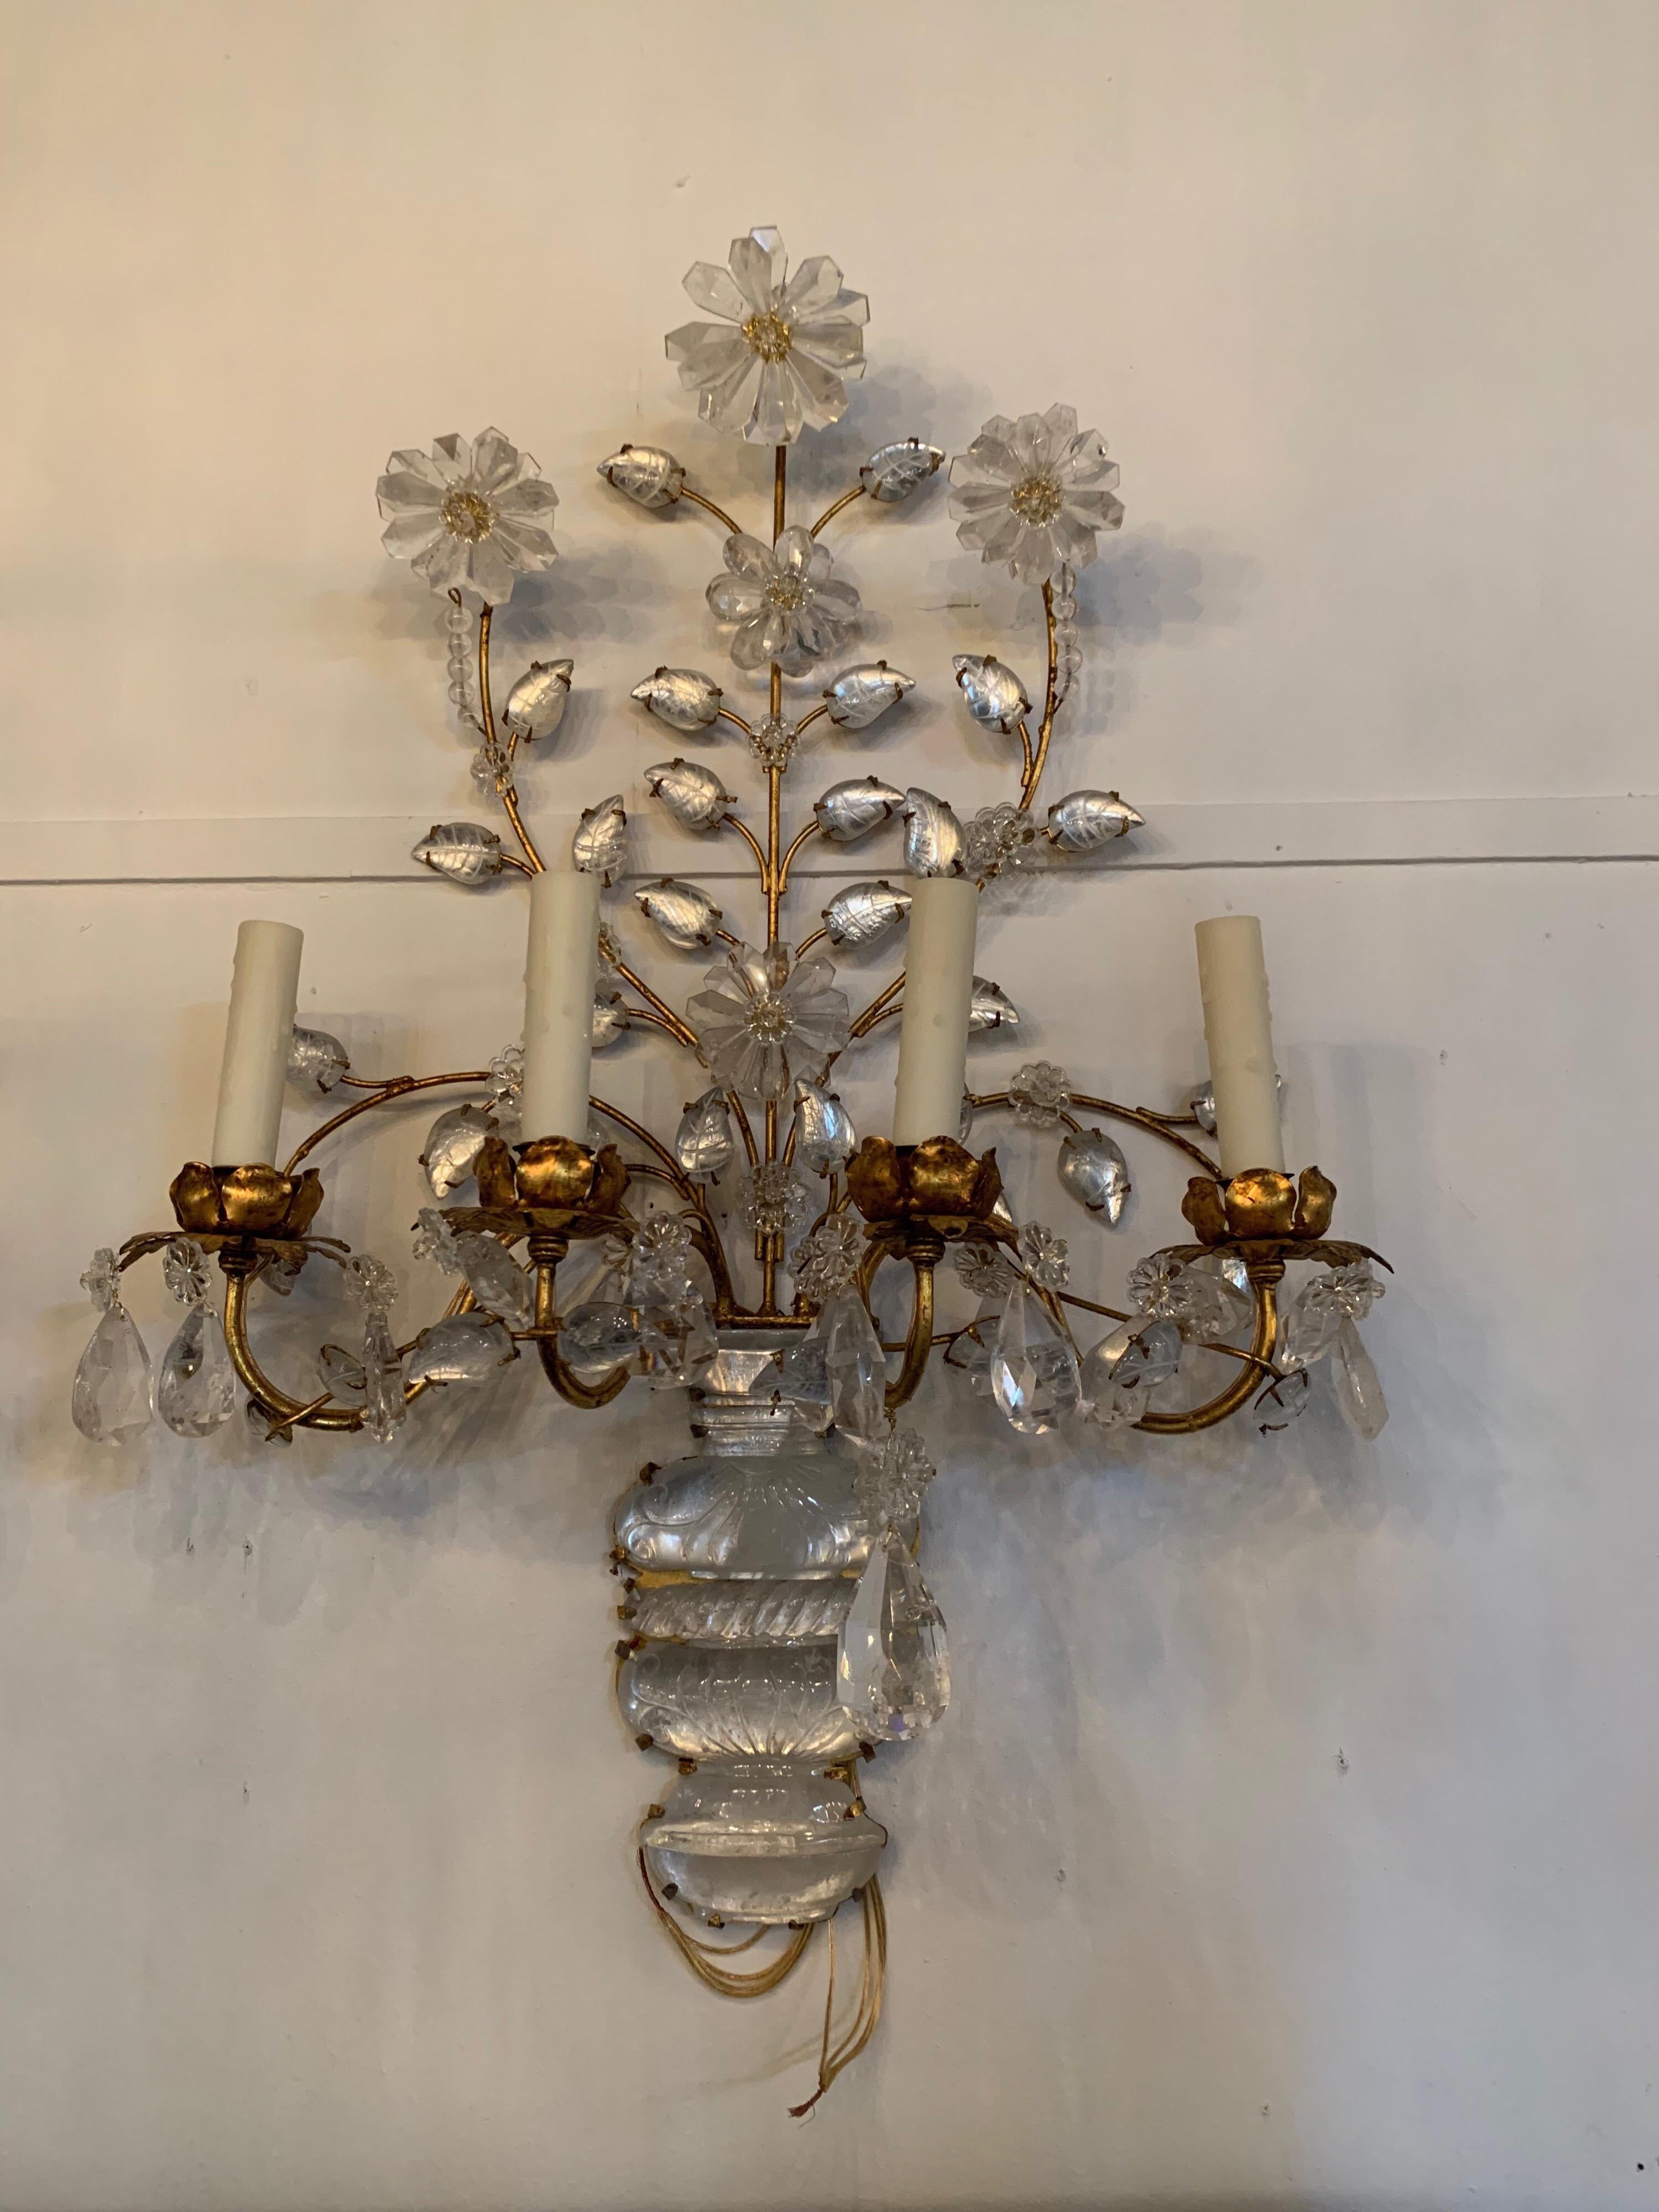 Fine pair of Italian rock crystal and gilt metal sconces. There are 4 lights on each sconce. Makes a beautiful statement!
 